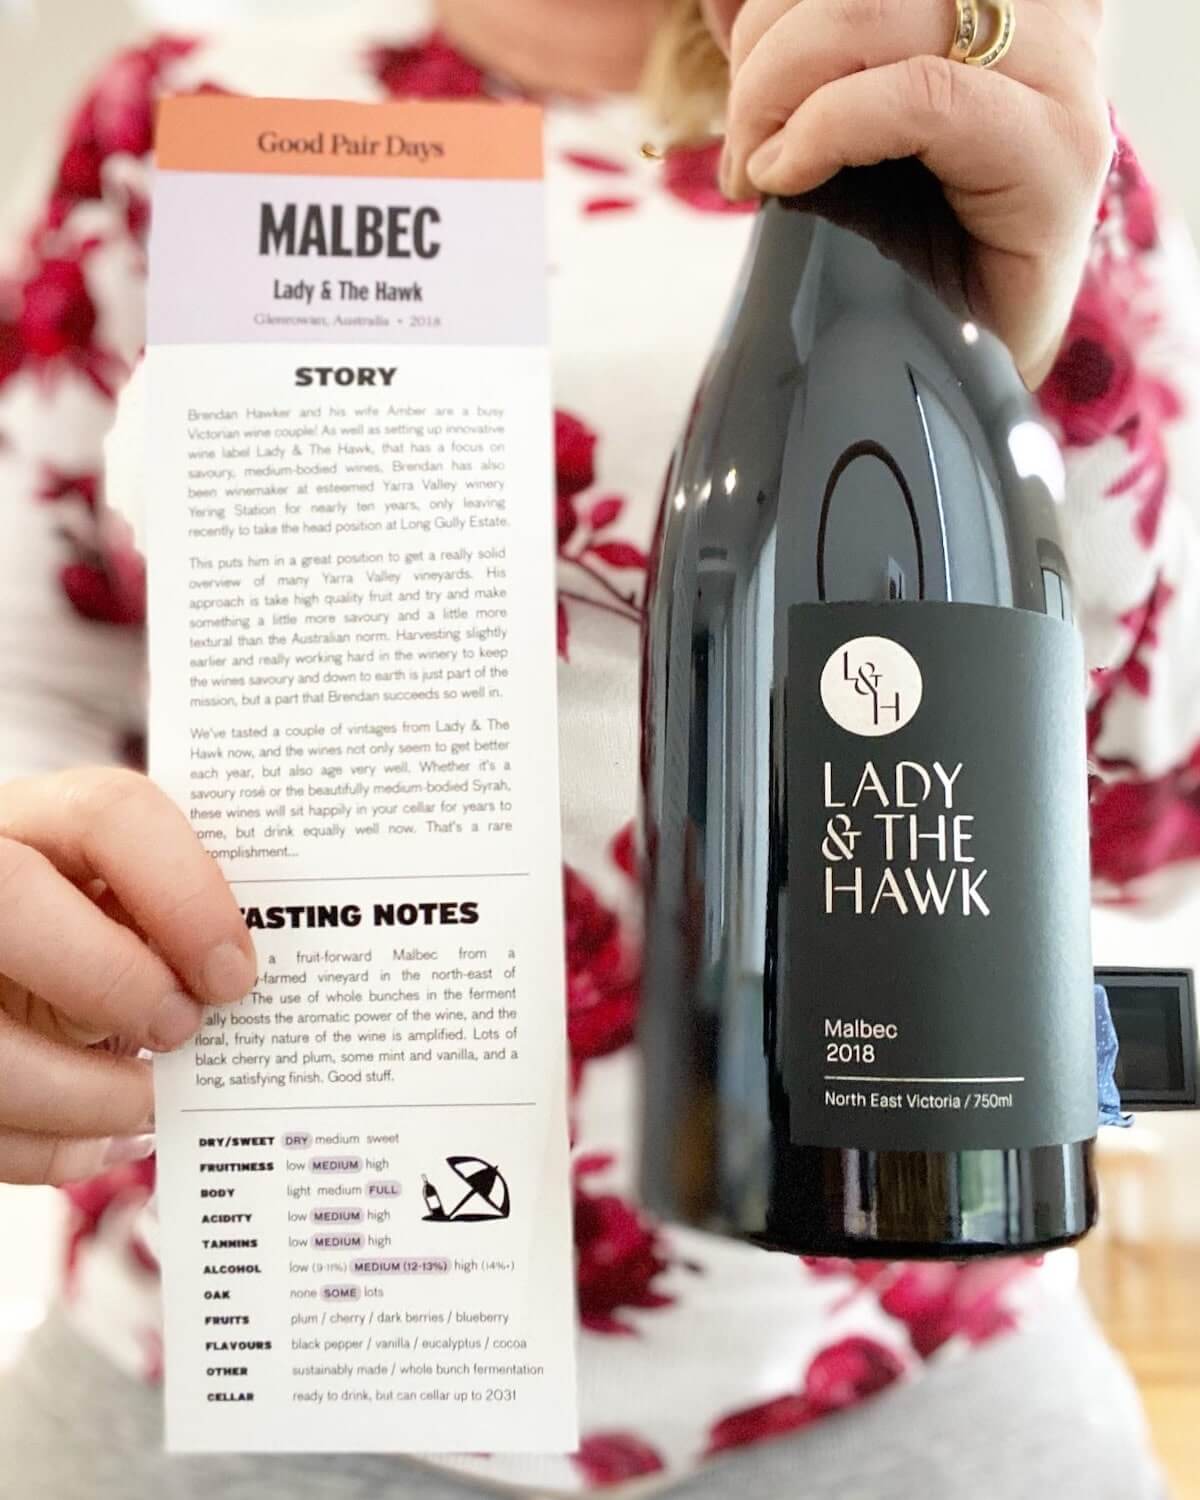 Lady and The Hawk 2018 Malbec - Good Pair Days